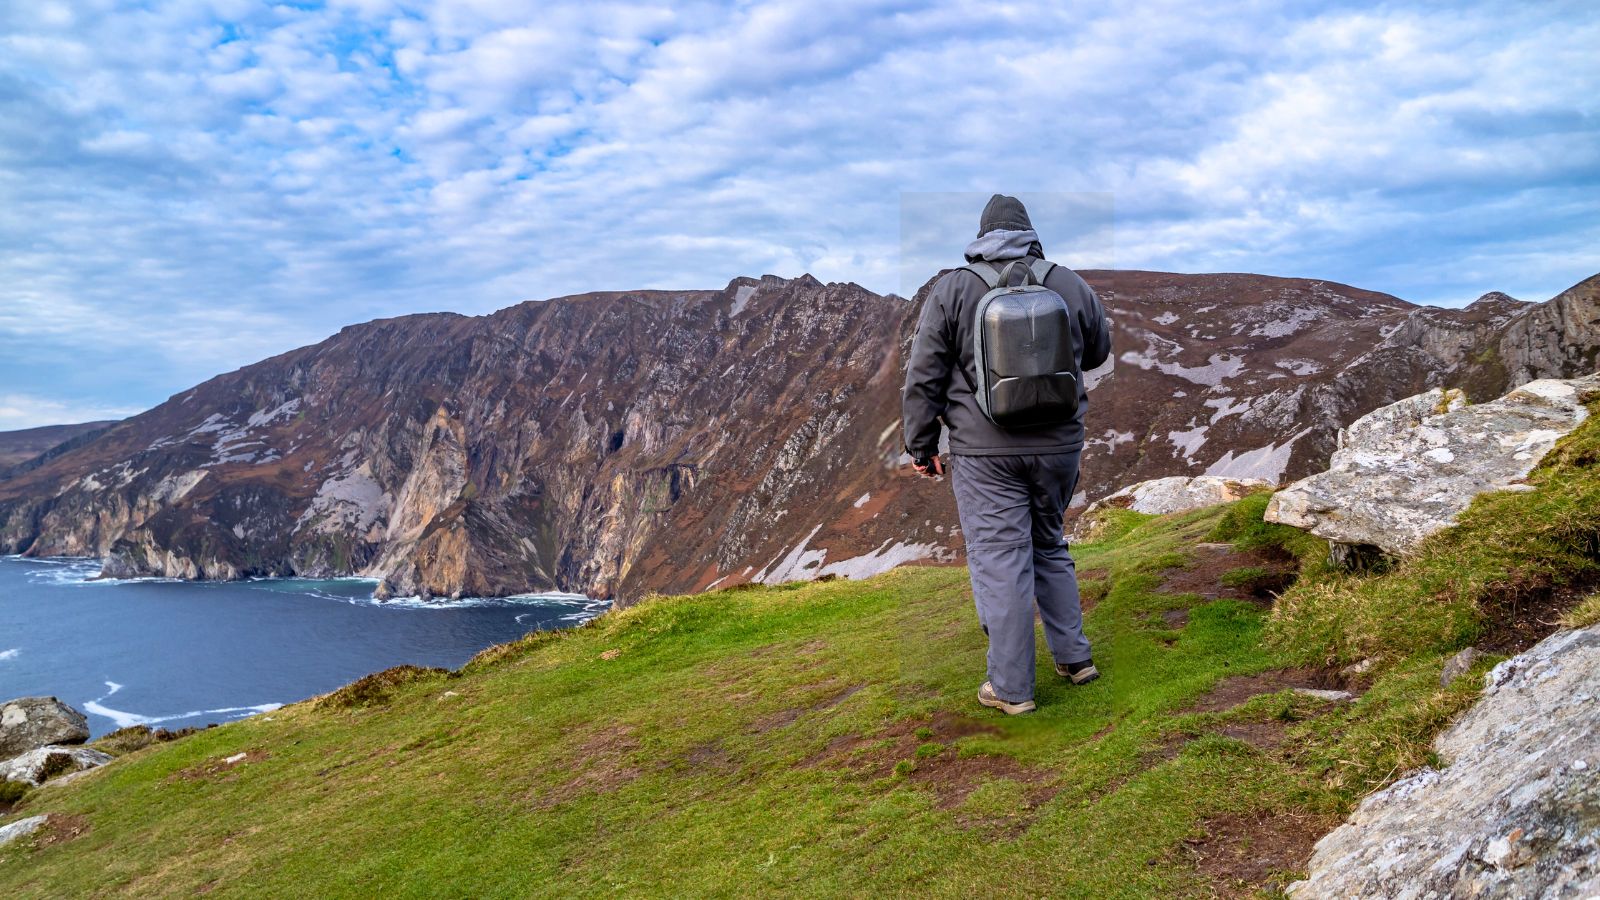 <p>Talking of wild coastal views, head to County Donegal on the Republic of Ireland’s northwest flank to visit Slieve League. Rising 600+ meters from rough seas below, they’re some of Europe’s highest and most impressive cliffs – rivaling the famed Cliffs of Moher.</p><p>When the clouds clear, the views from the top of Slieve League are outstanding. A head for heights helps, but anyone can appreciate the rugged natural beauty of this stretch of the Irish coast.</p>